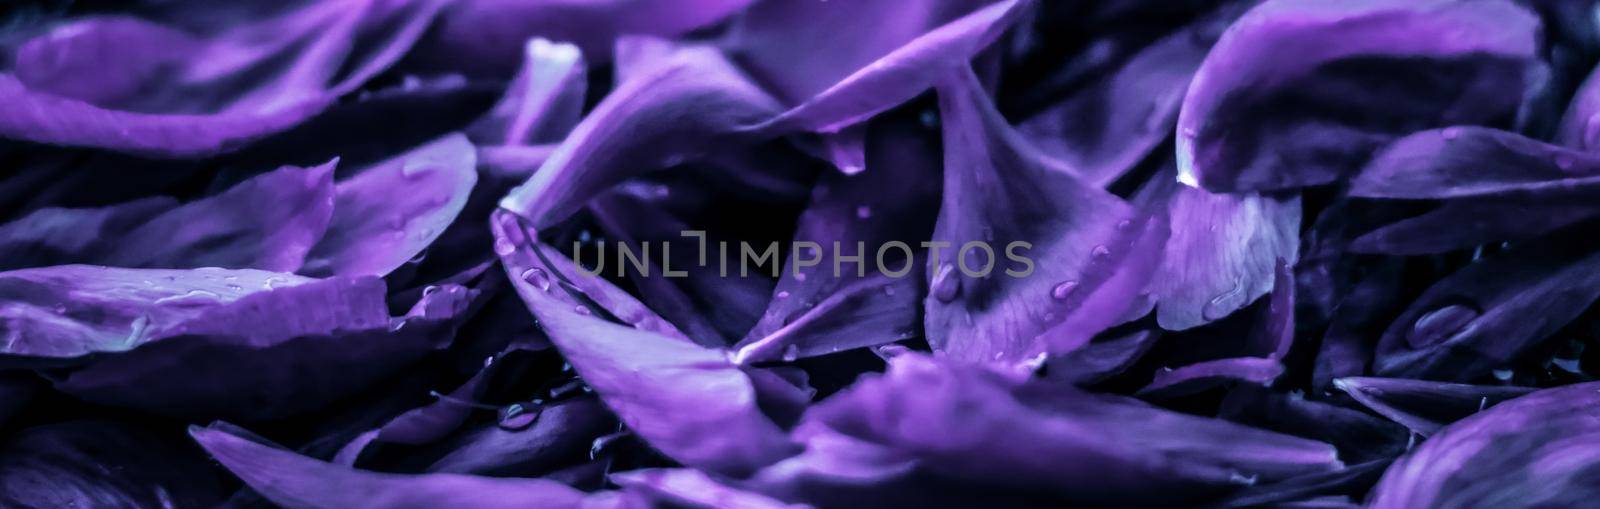 Branding, blossom and botanical concept - Abstract floral holiday art background, purple blooming flower petals in dream garden and beauty in nature for luxury spa brand and wedding invitation design